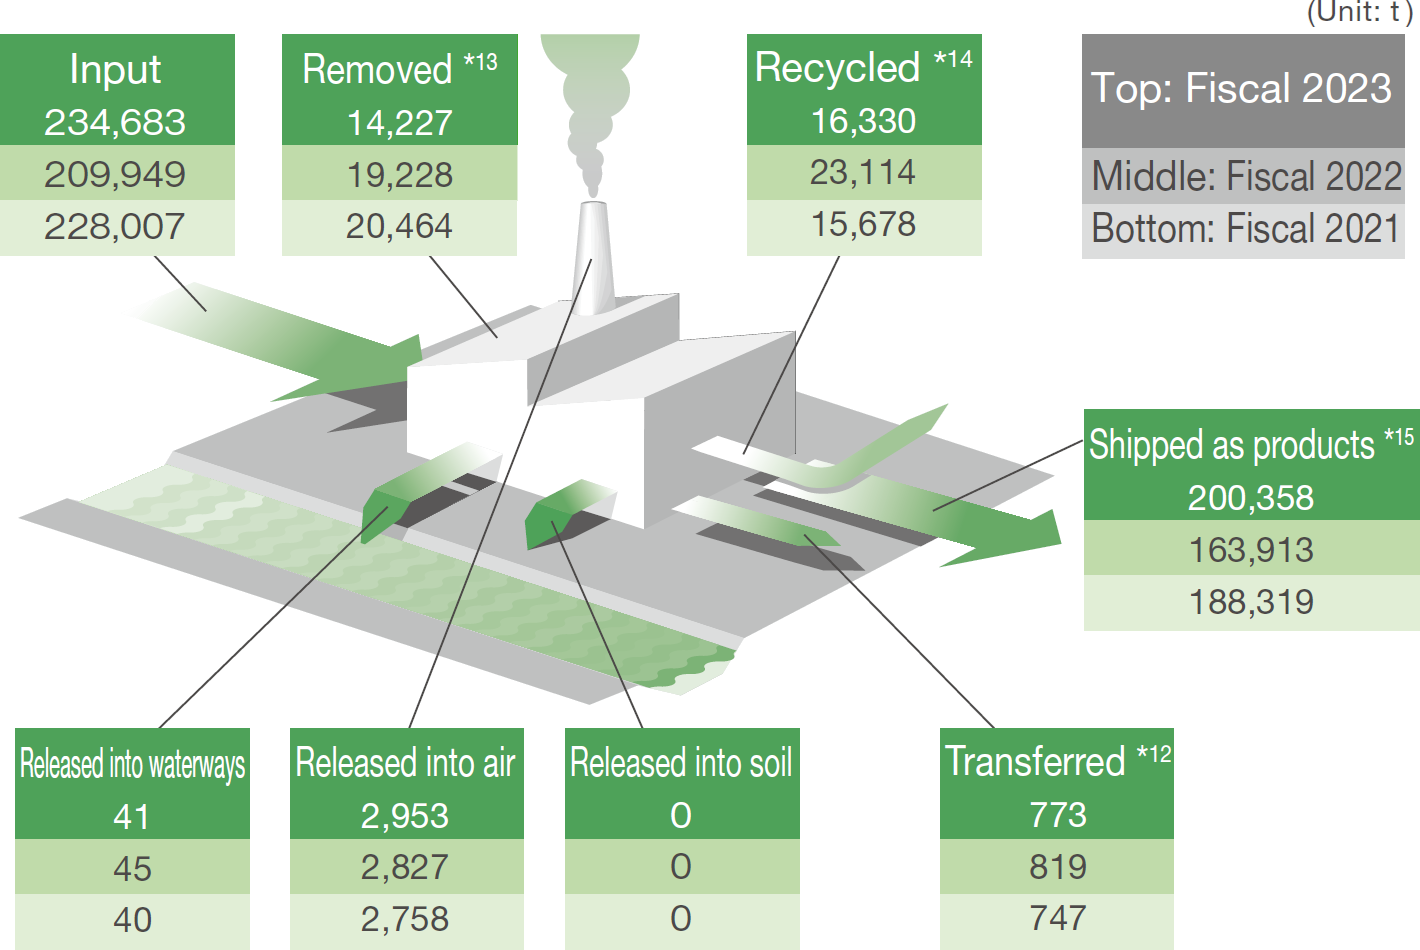 Material balance of substances in the management rank. In fiscal 2022 input: 209,949 tons, removed: 19,228 tons, released into waterways: 45 tons, released to air: 2,827 tons, released into soil: 0 ton, recycled: 23,114 tons, transferred: 819 tons, and shipped as products: 163,913 tons.